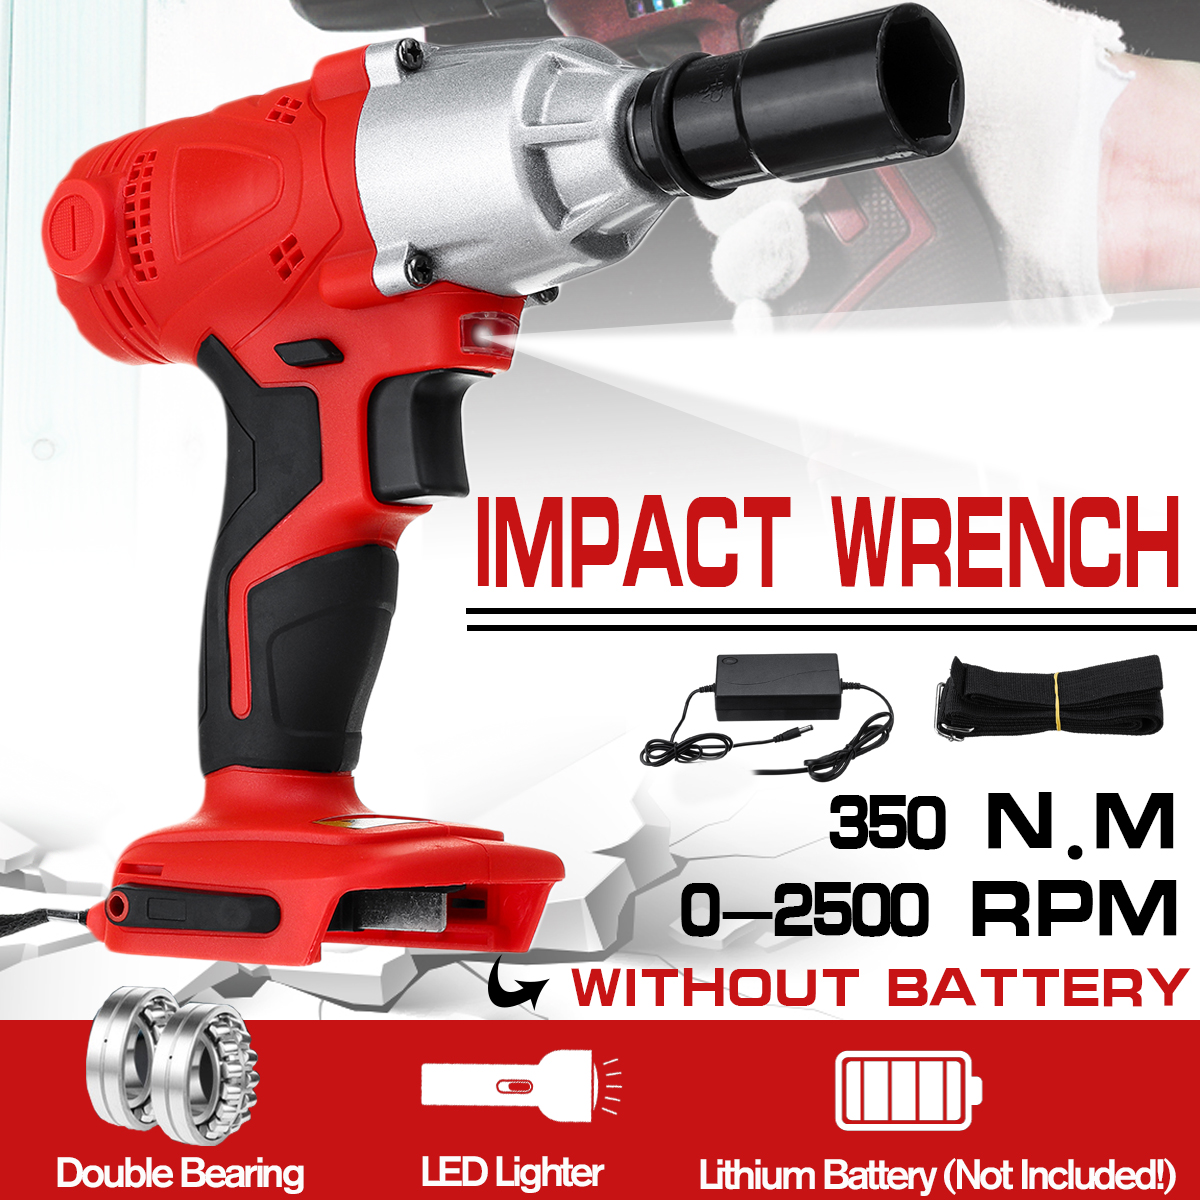 180V-240V-Cordless-LED-Light-Impact-Wrench-50Hz-350-Nm-Waterproof-Electric-Wrench-Adapted-To-18V-Mak-1590254-2